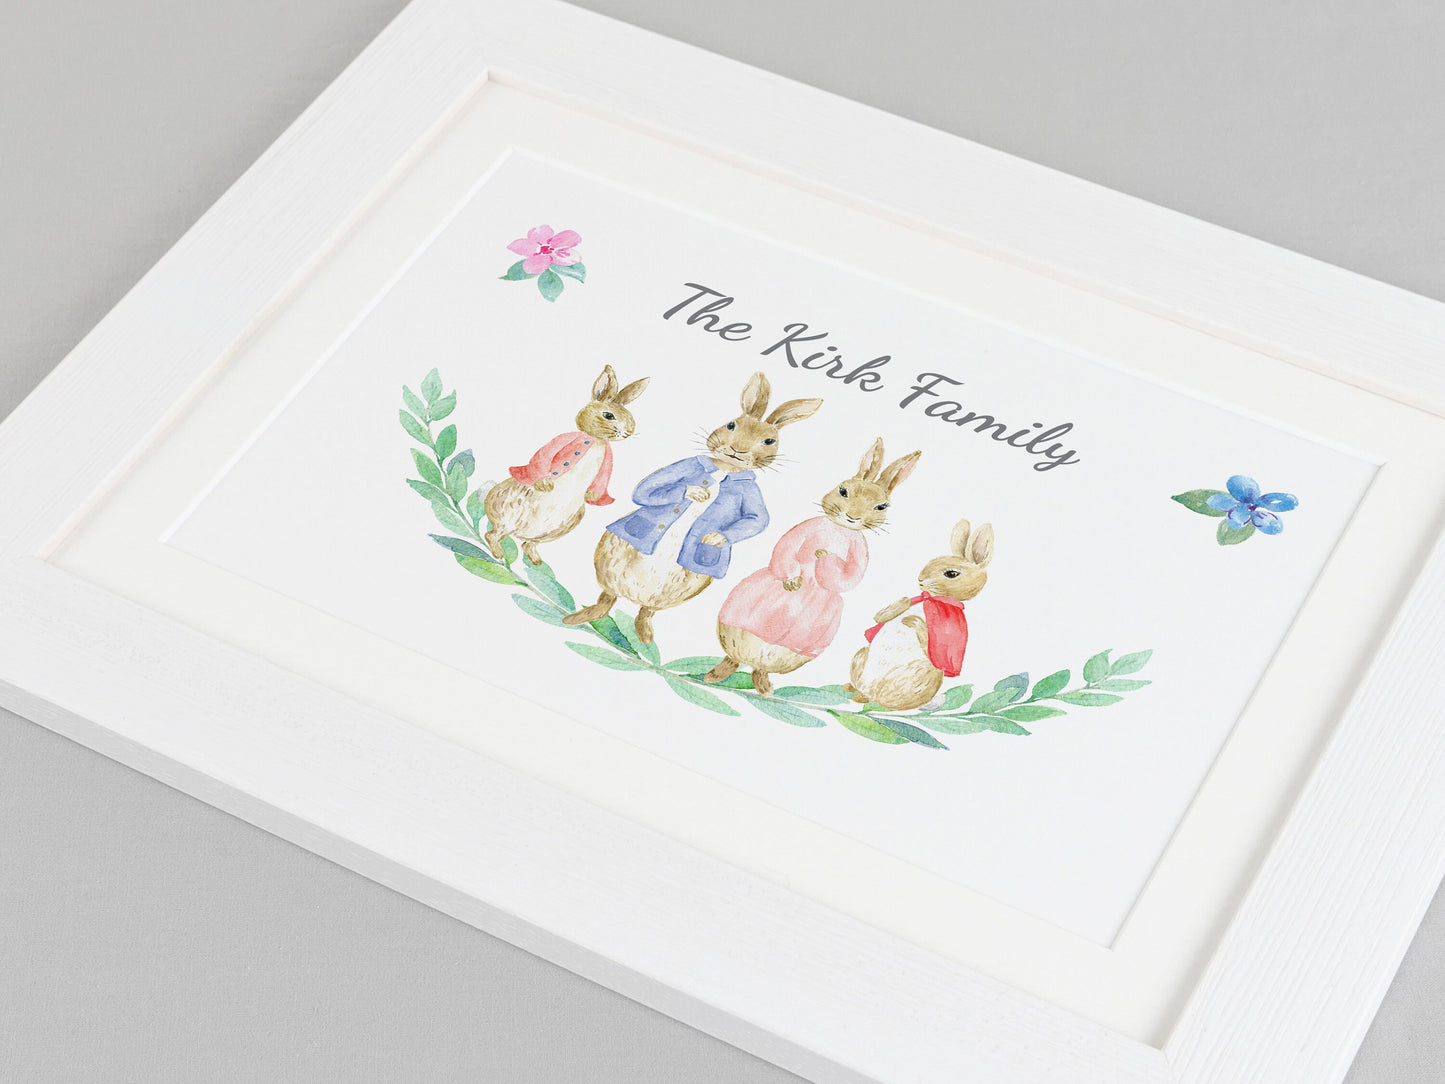 Personalised Family Print | Family Line-up Gift | Gift for mum | Our Family Wall Art | Gift for granparents VA132